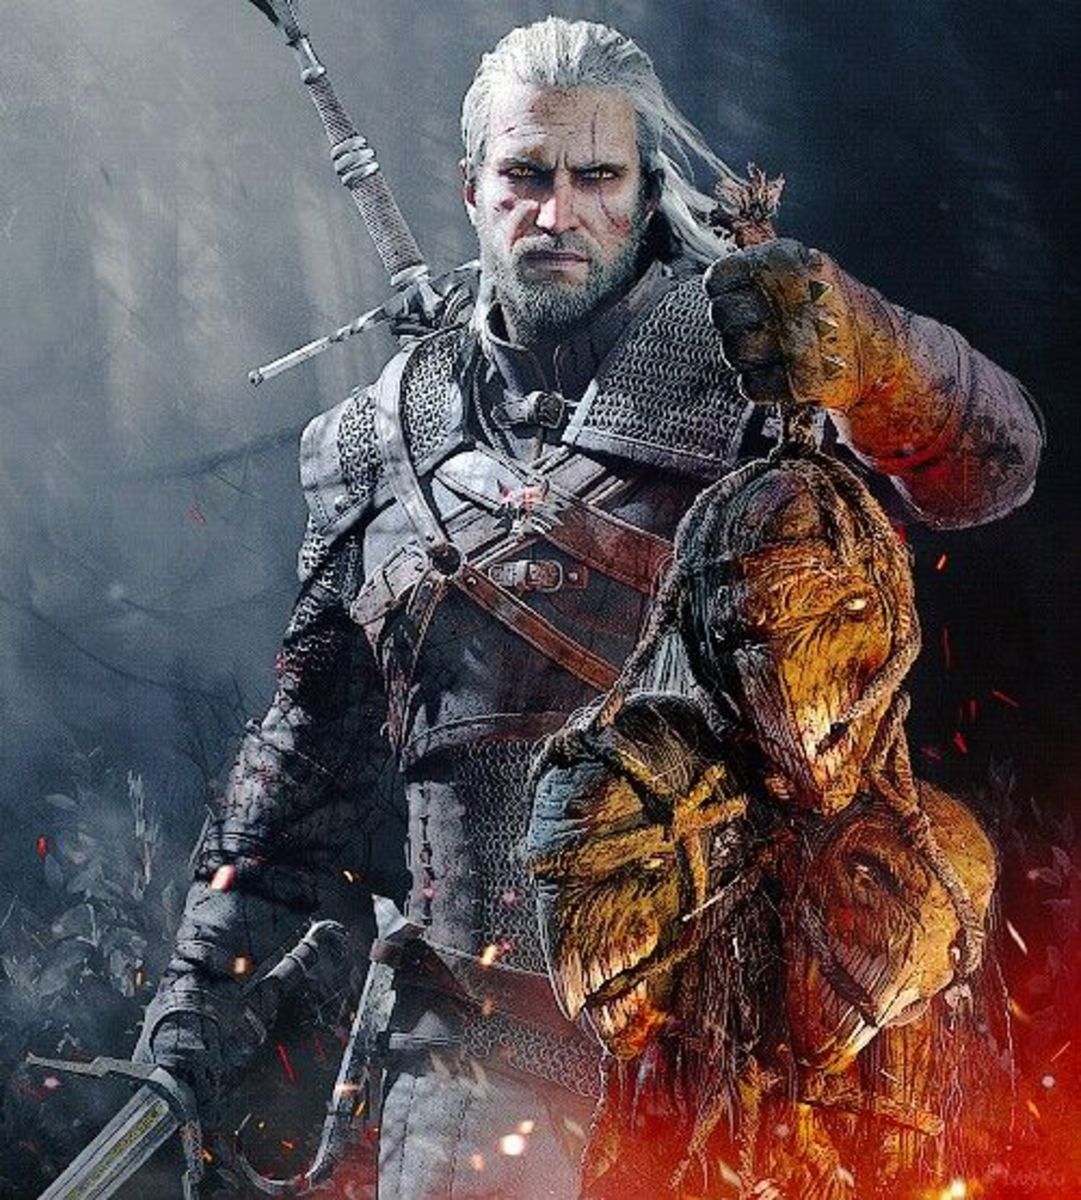 The Witcher, Geralt of Rivia